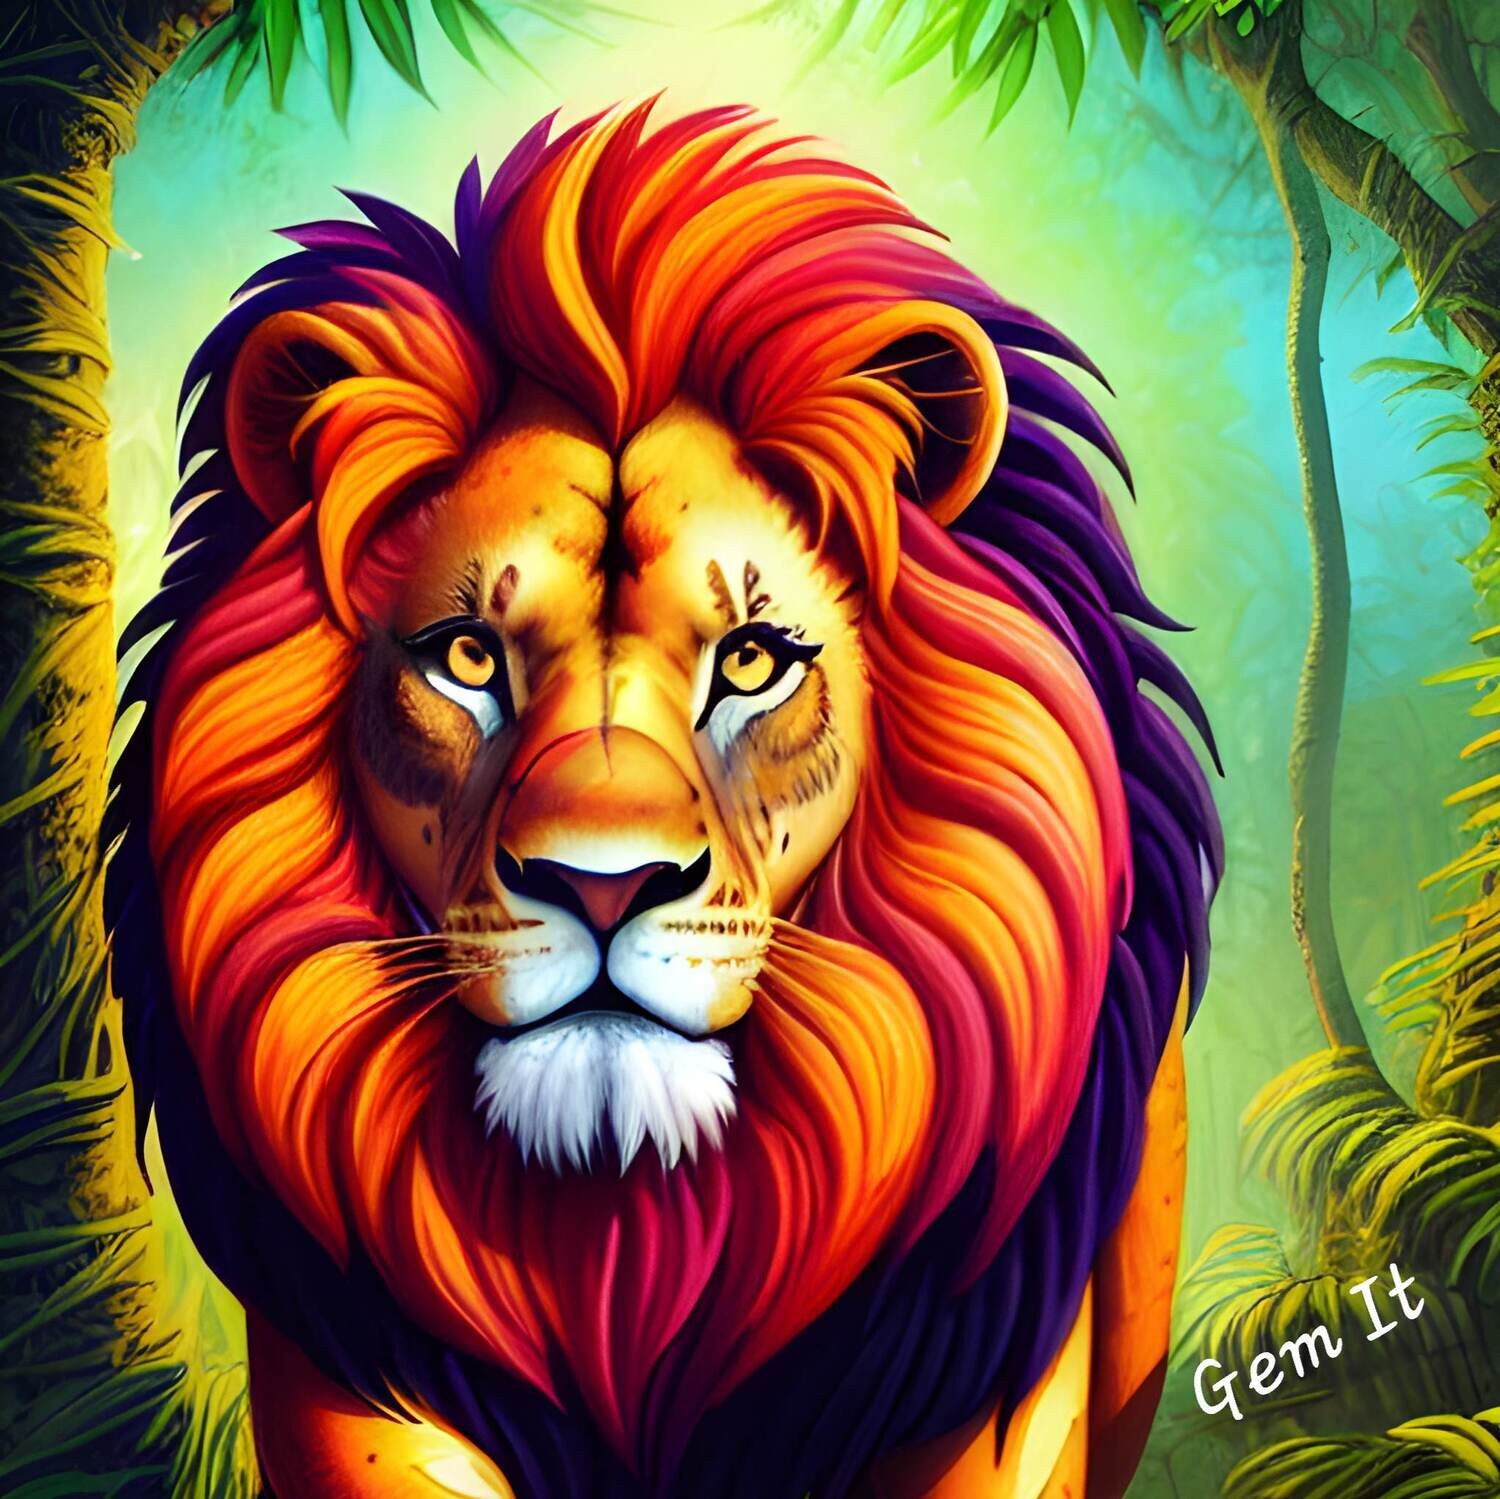 Lion 738 - Full Drill Diamond Painting - Specially ordered for you. Delivery is approximately 4 - 6 weeks.